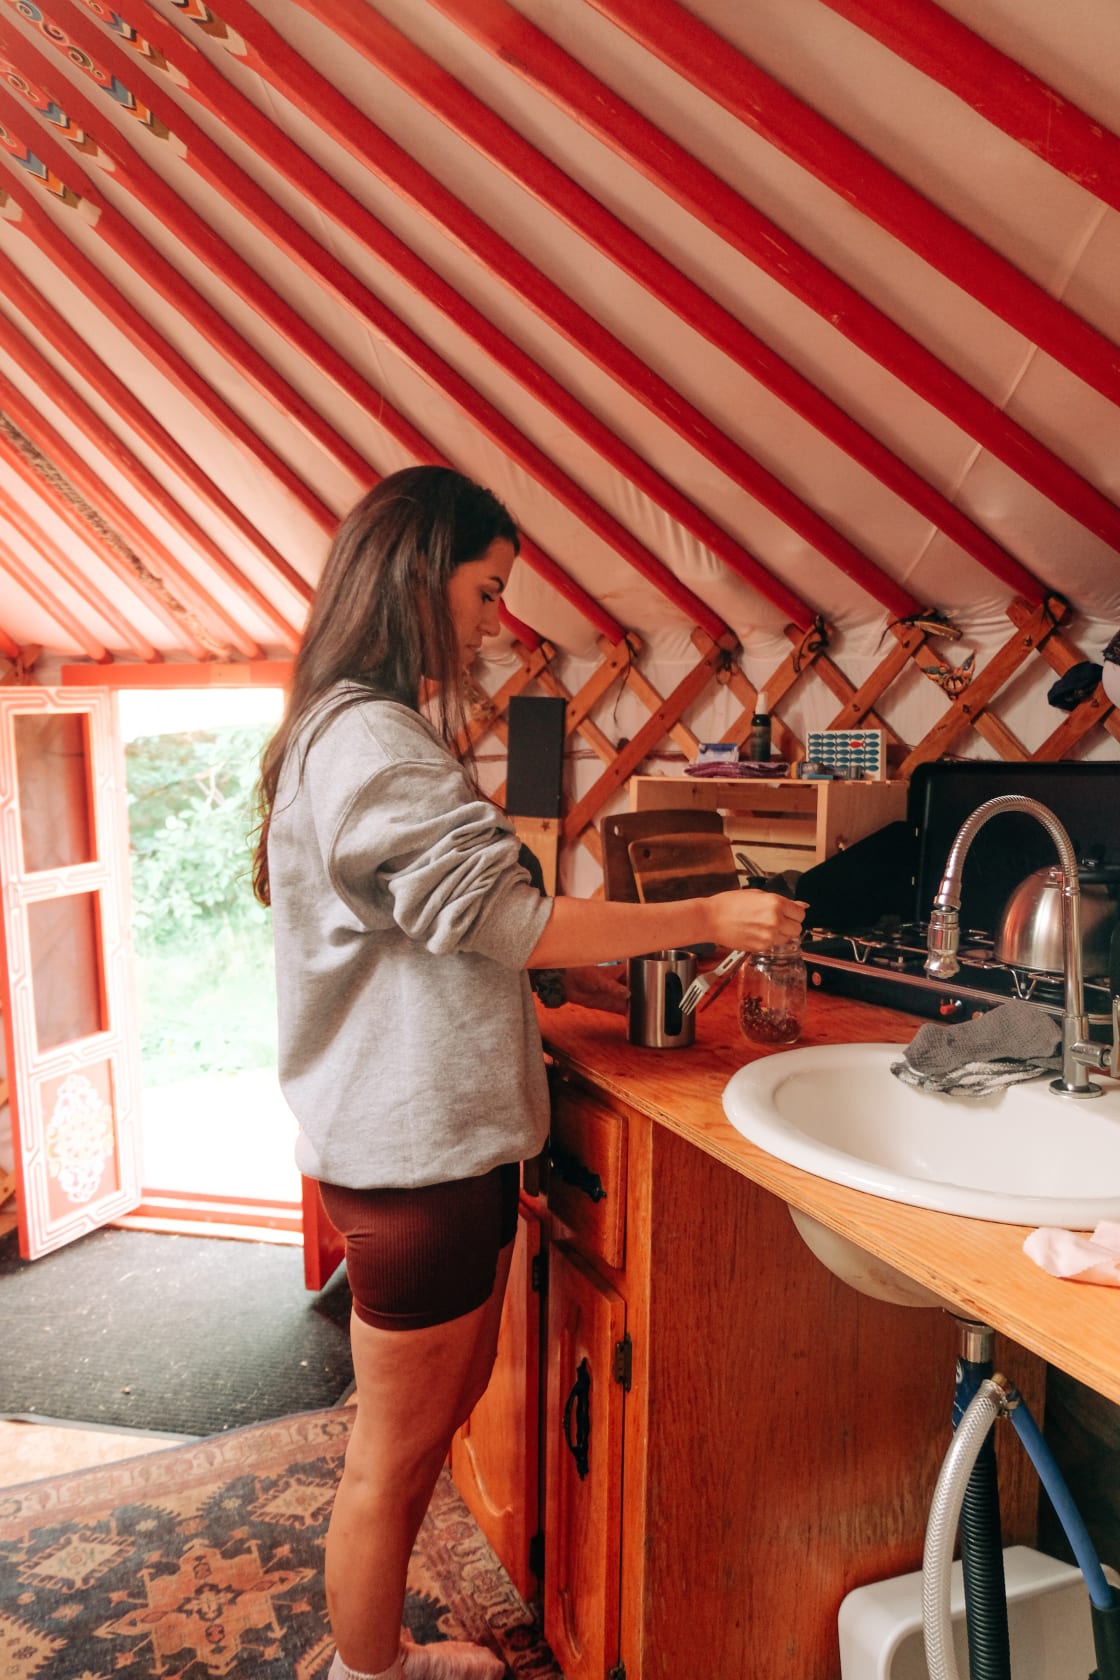 There is a selection of natural teas available to try at EarthSea yurt and we made some tasty tea to start our morning. 